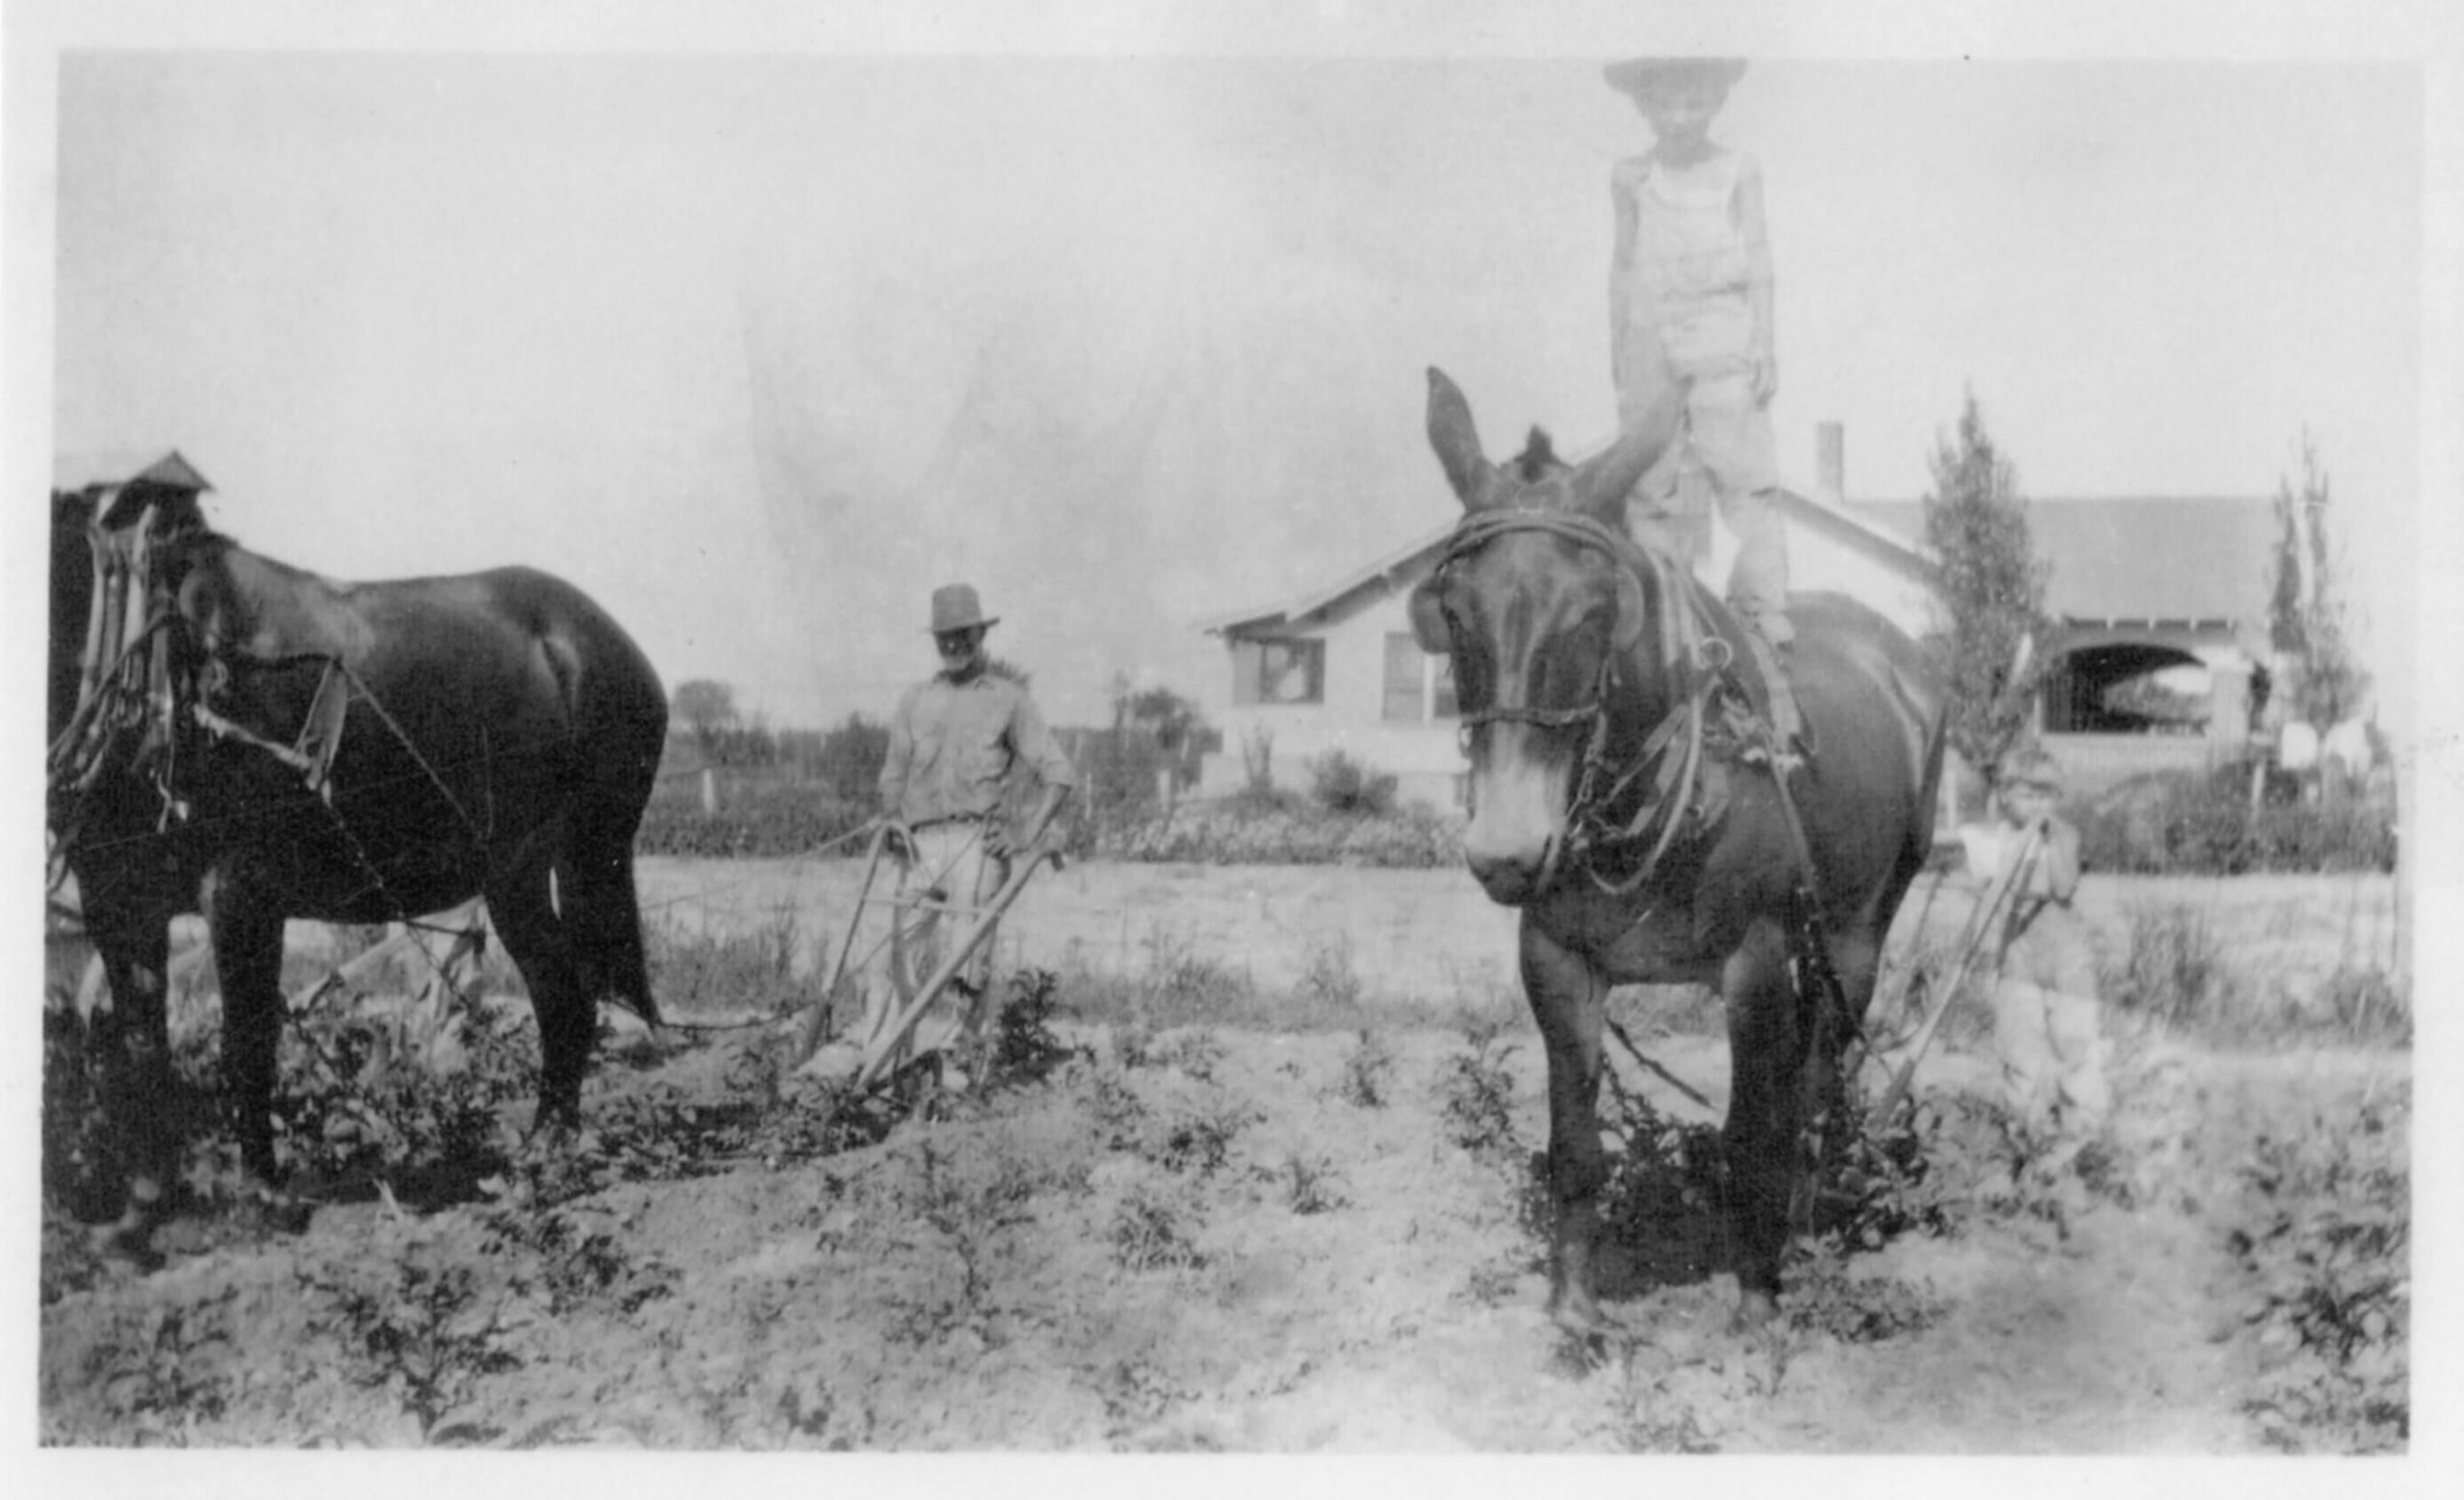 Vintage historic photograph of a farmer and a donkey on a farm where the MCVC clinic now stands